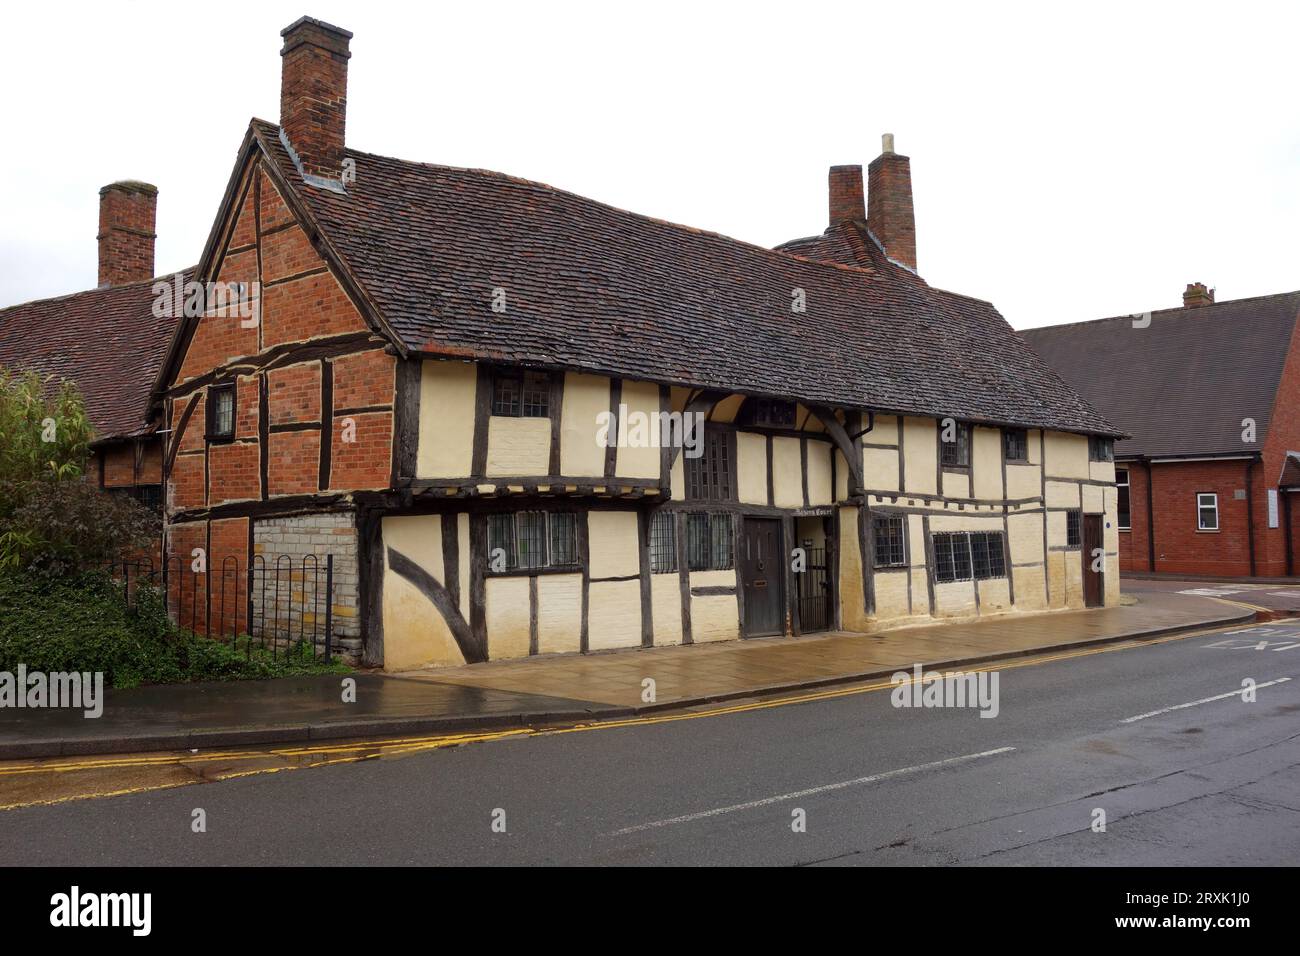 Masons Court a Medieval Wealden Hall on Rother St Built in the1480s is the oldest house in Stratford-upon-Avon, Warwickshire, West Midlands, England. Stock Photo